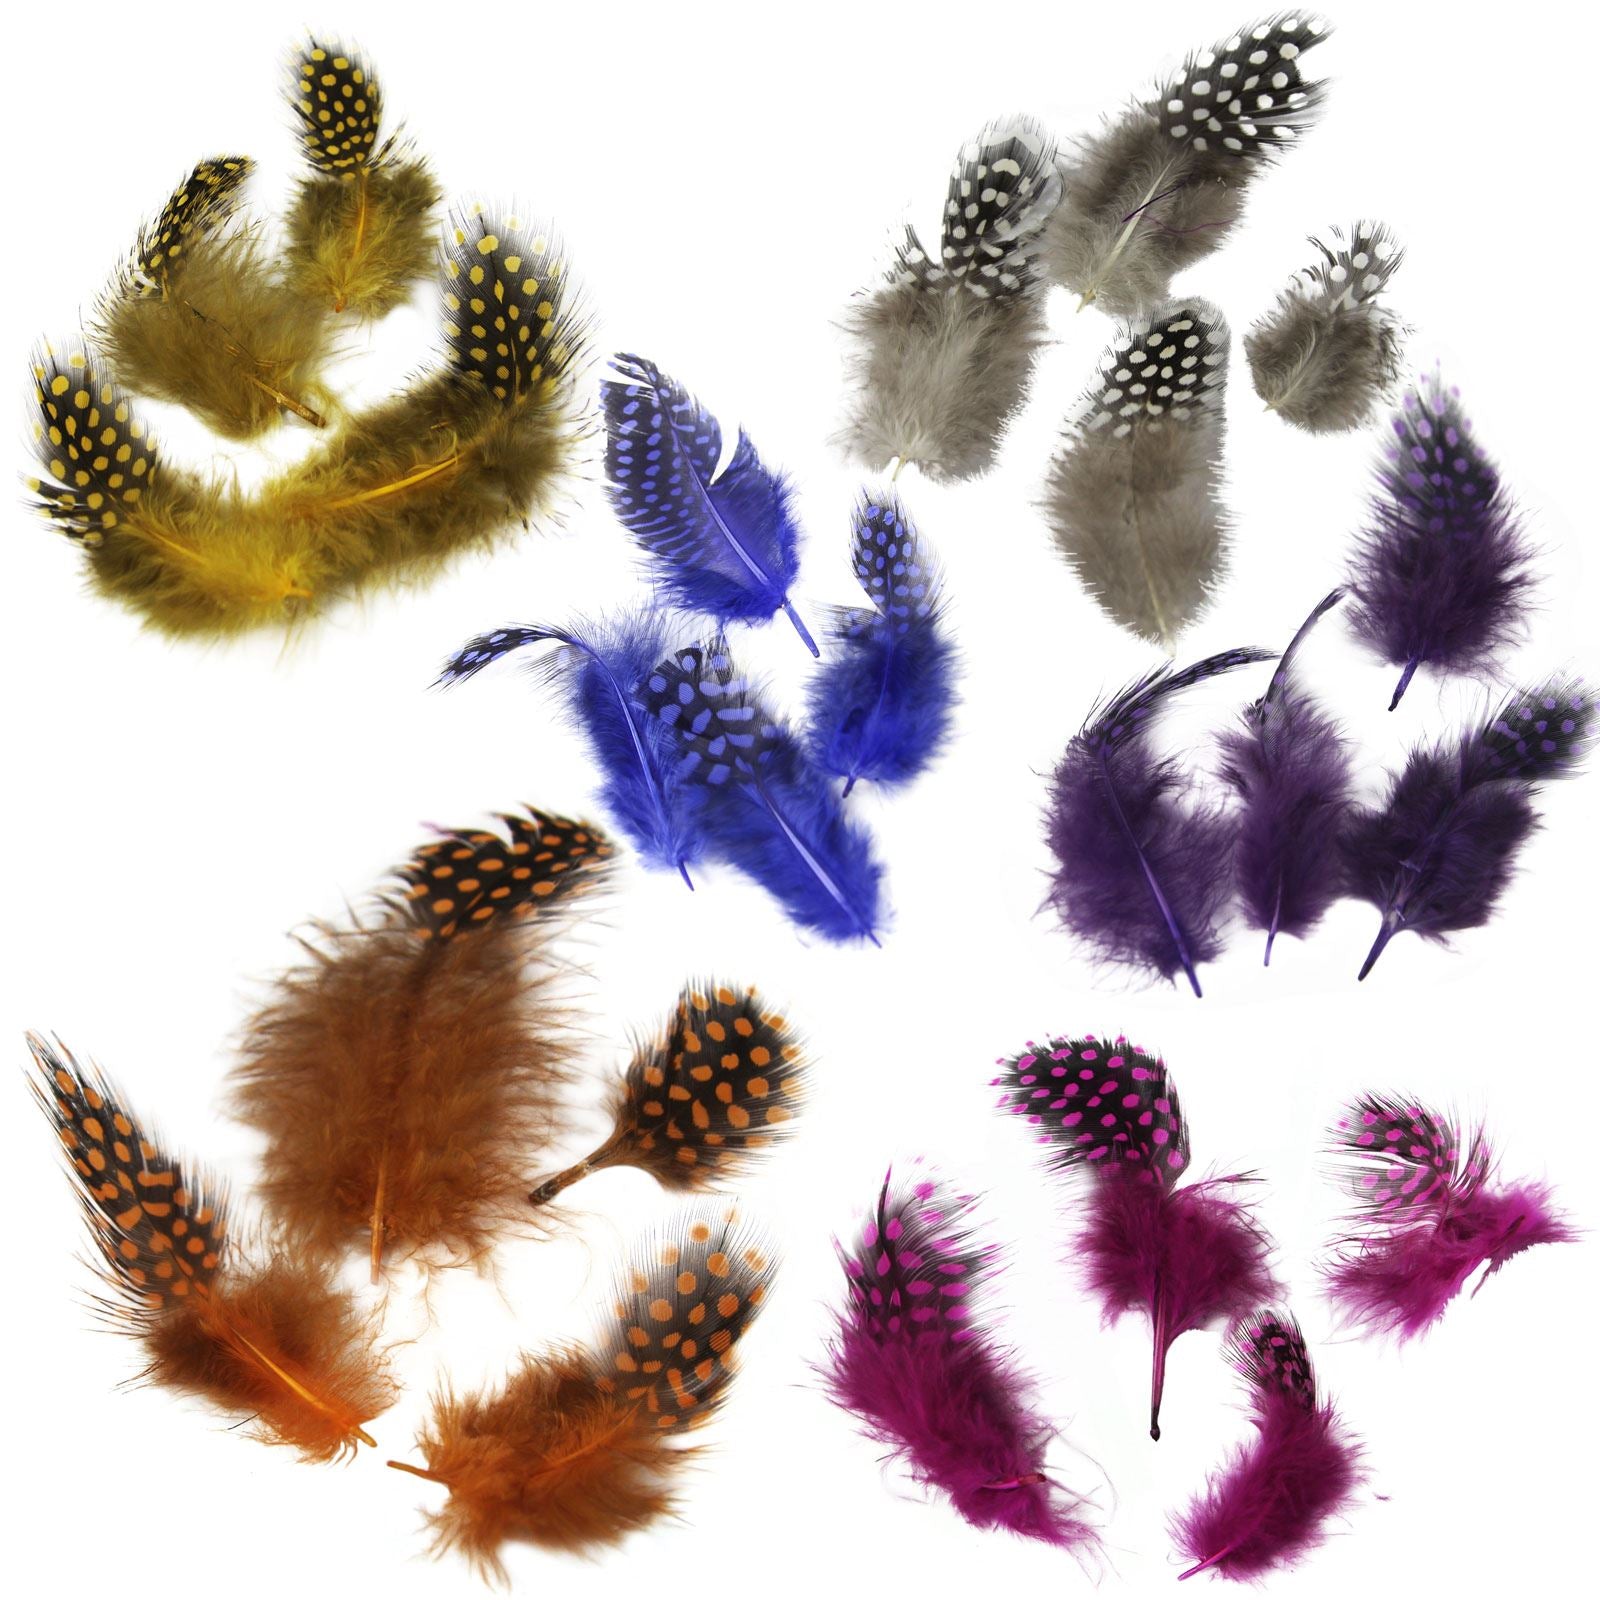 Spotted Guinea Fowl Feathers